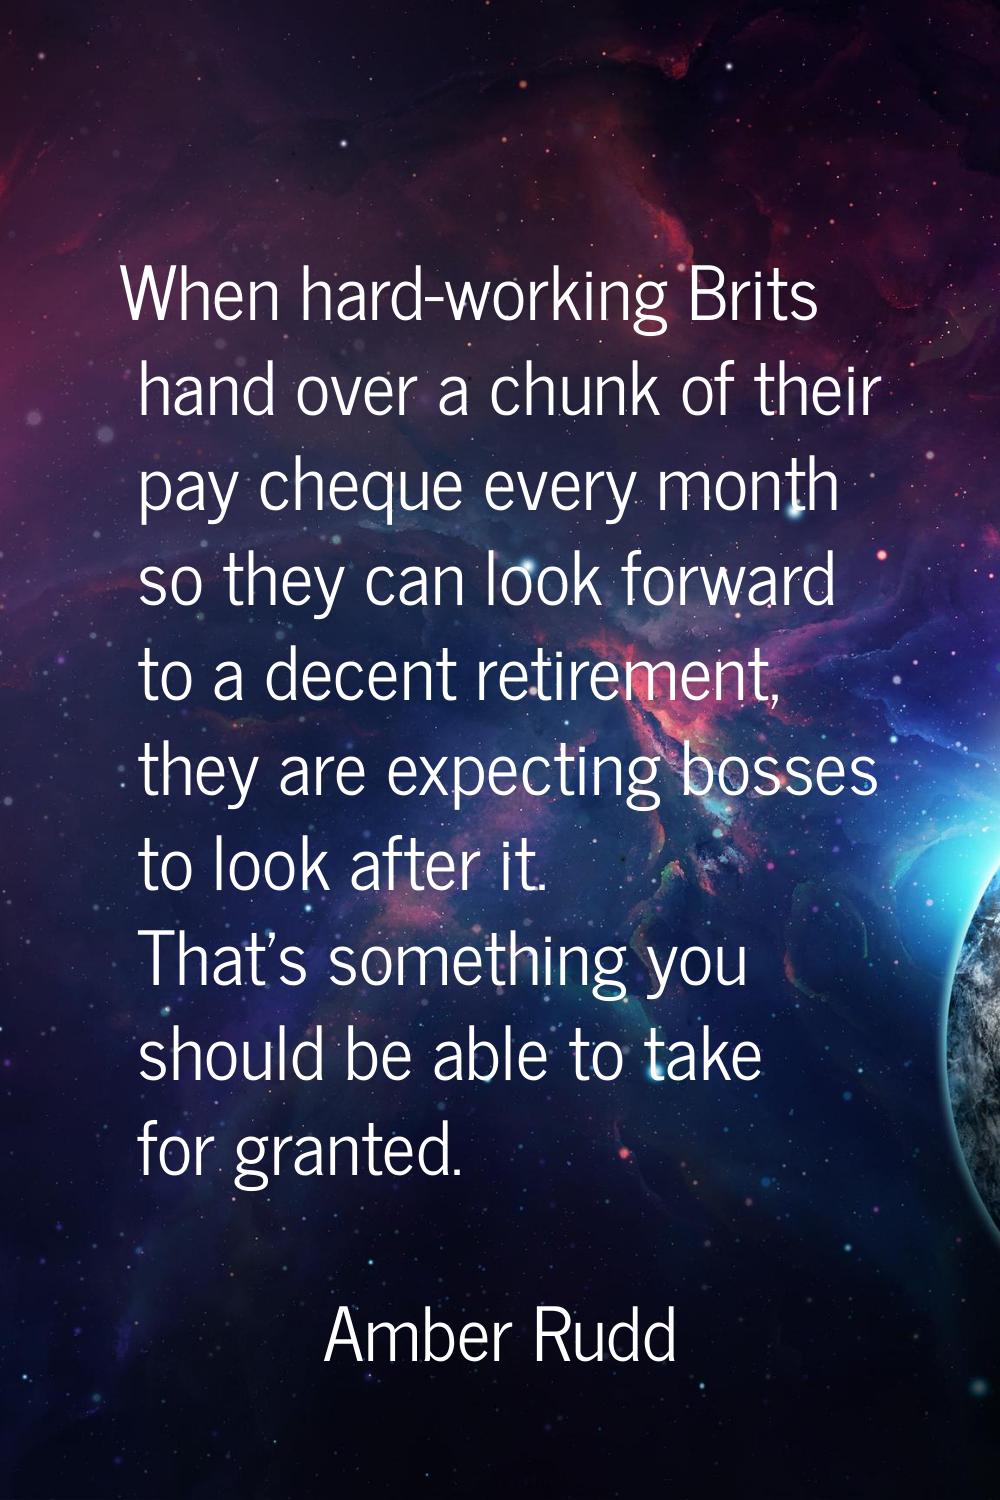 When hard-working Brits hand over a chunk of their pay cheque every month so they can look forward 